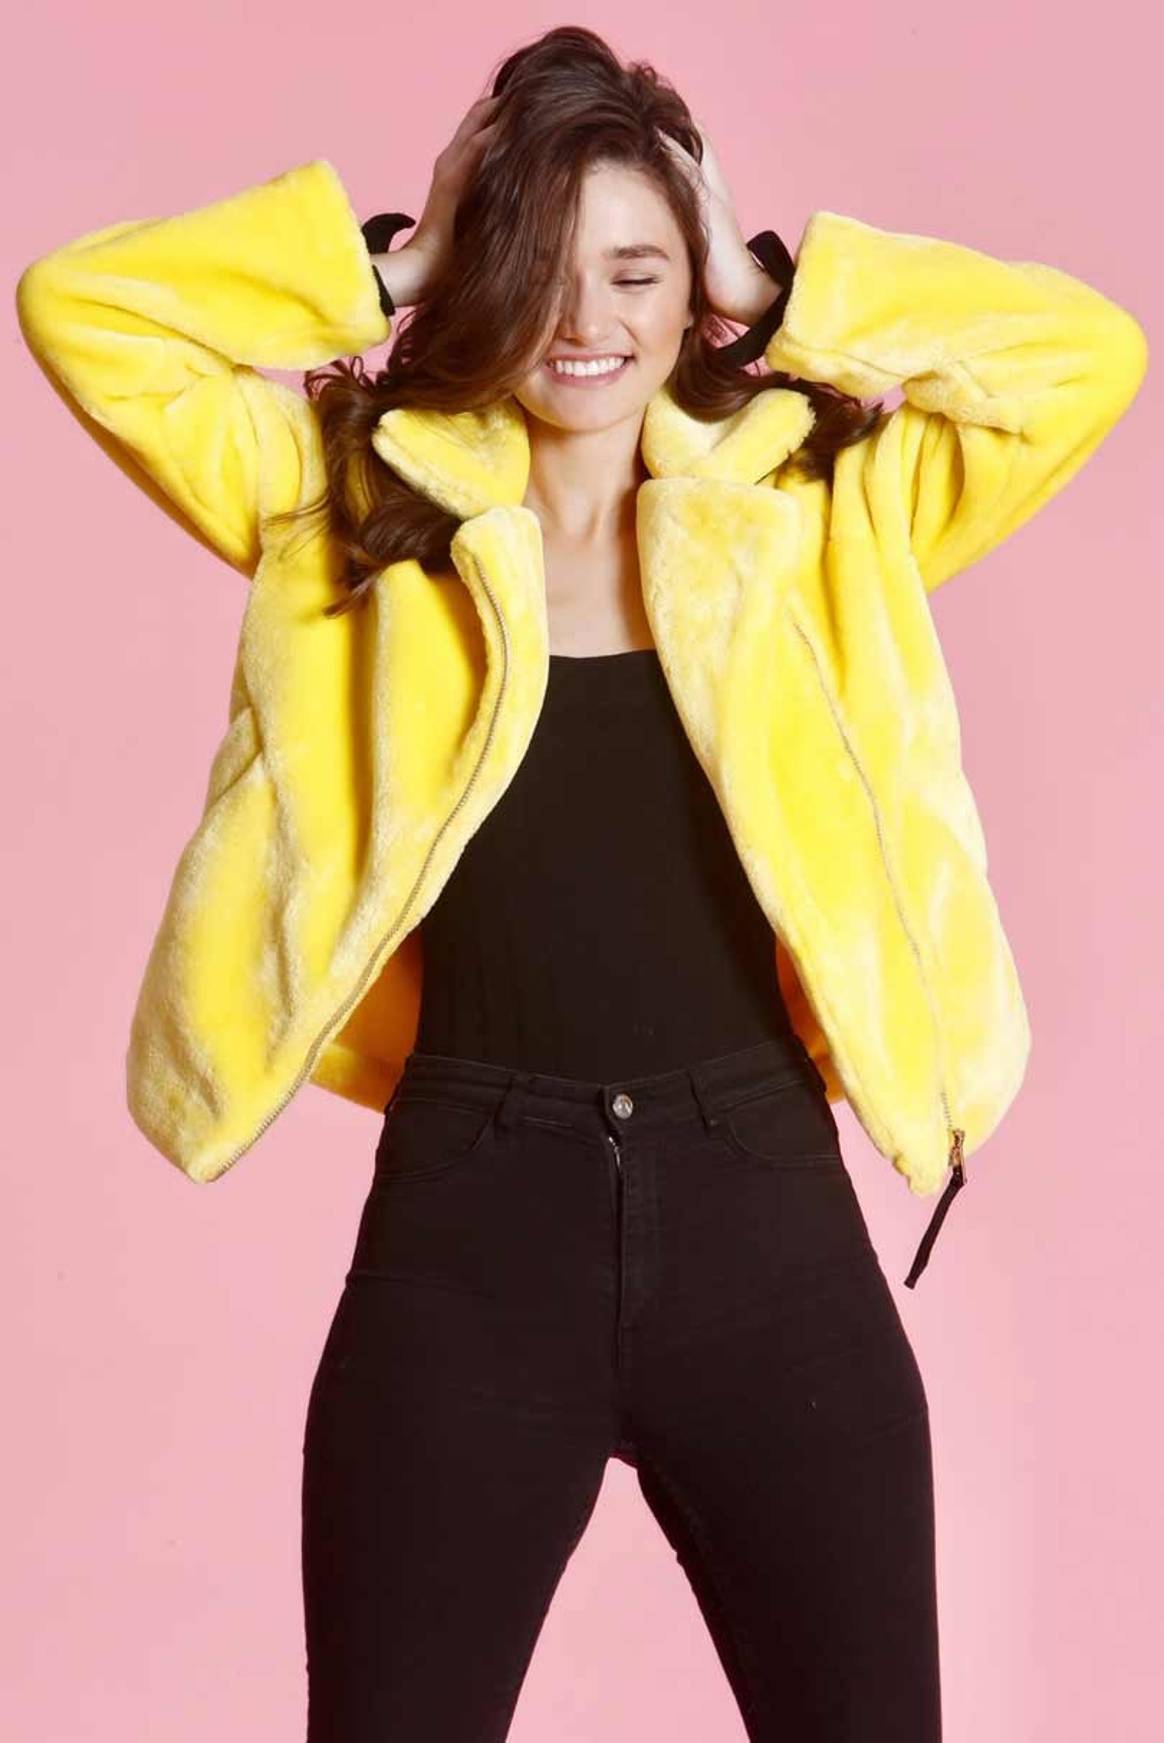 Juicy Couture partners with K&S for outerwear collection